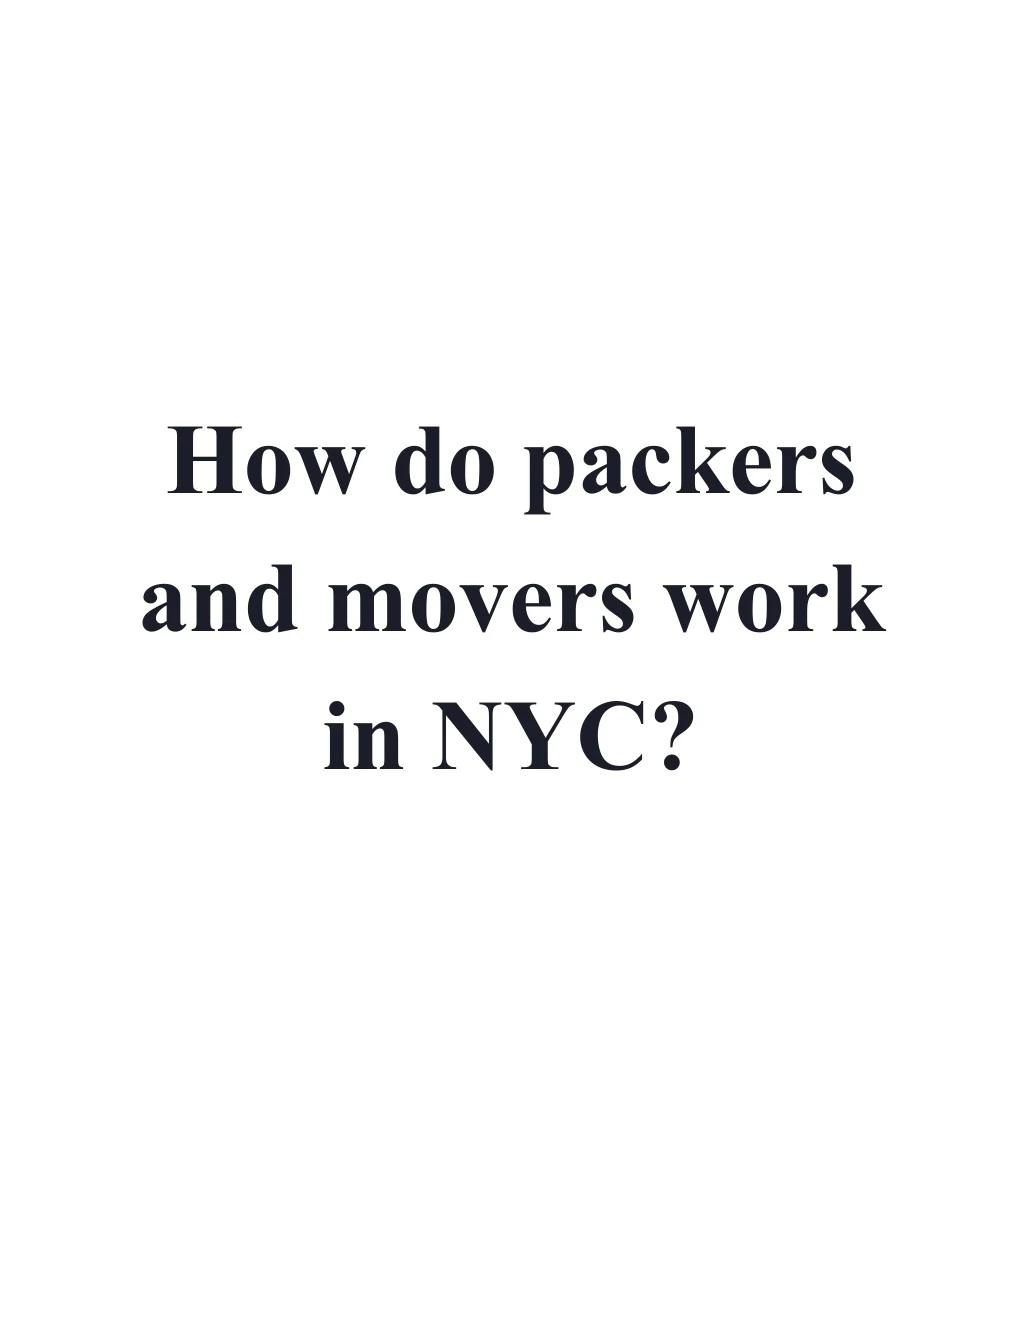 how do packers and movers work in nyc